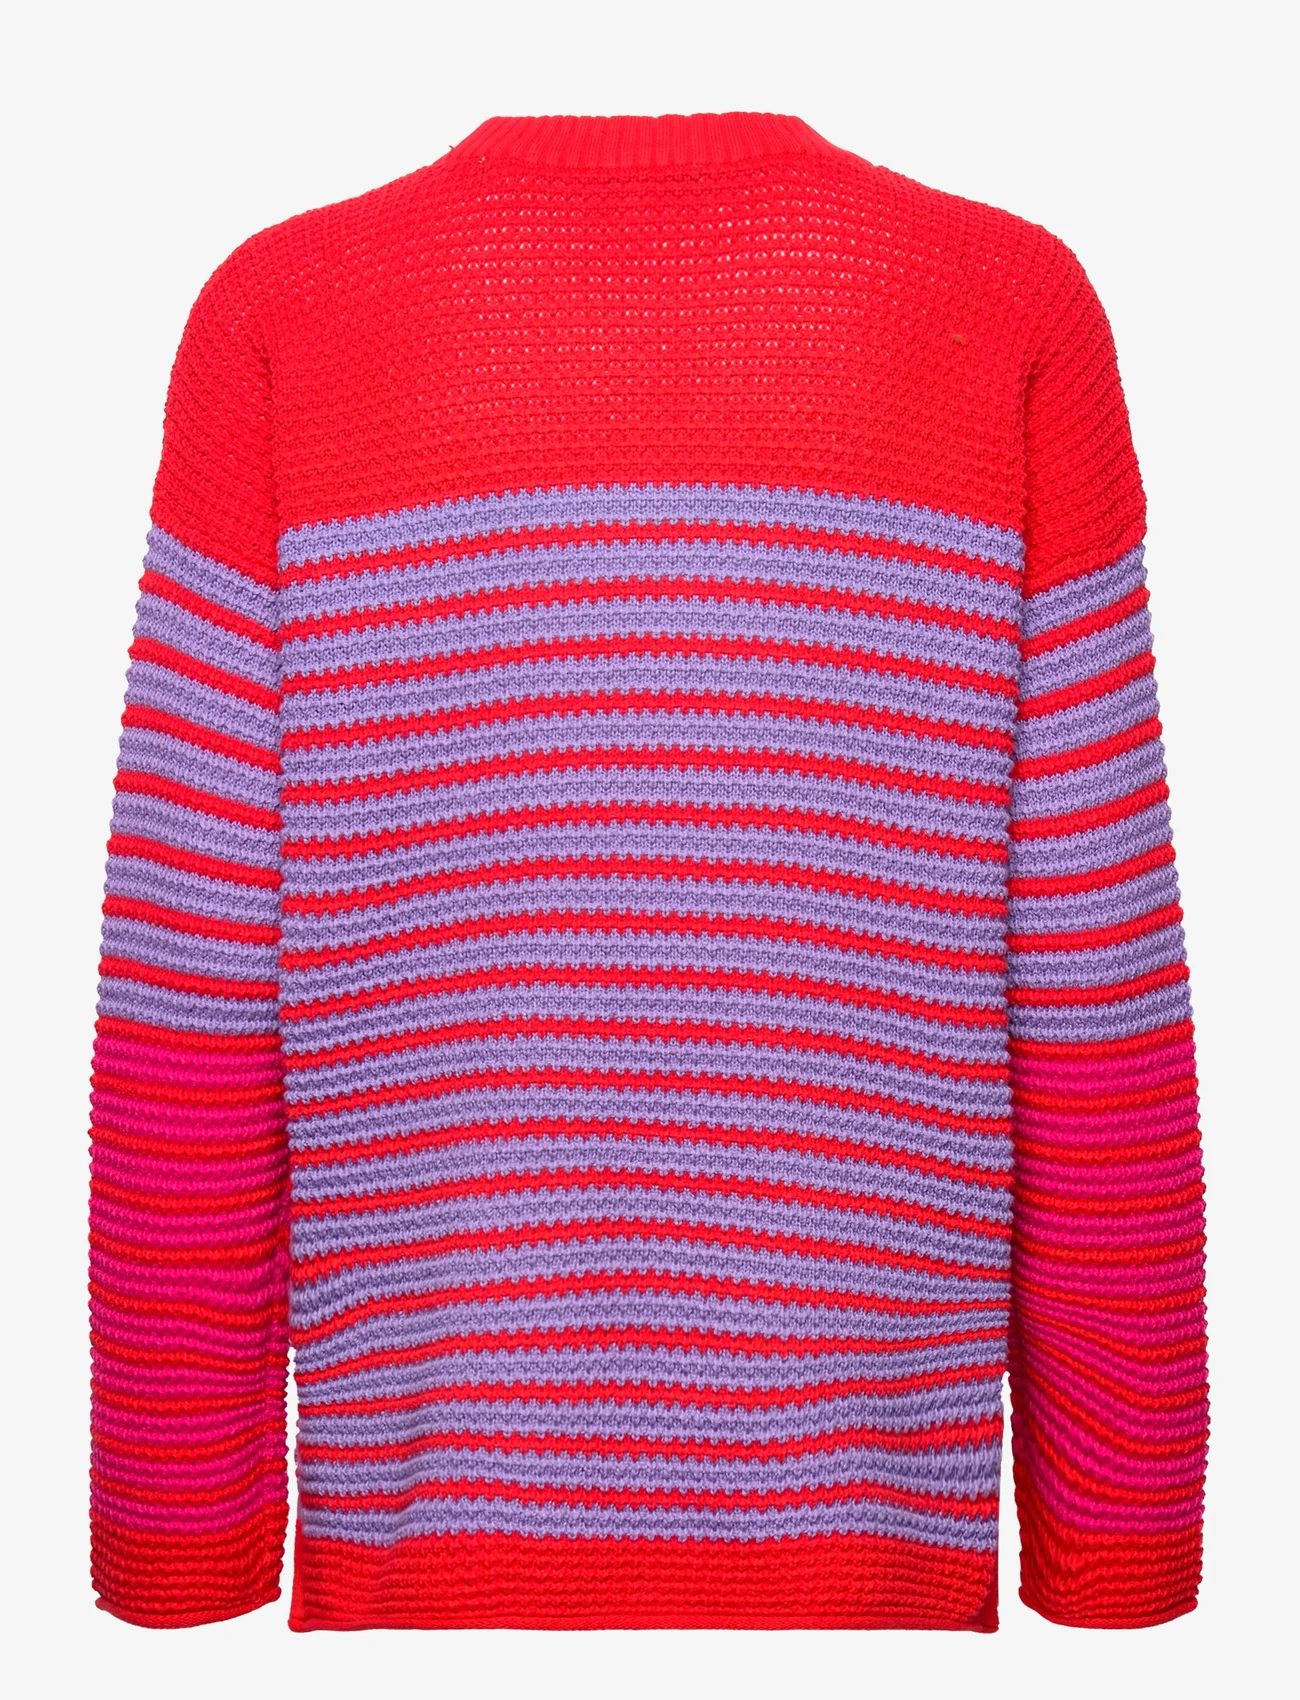 Esprit Casual - Textured knitted jumper - swetry - red 4 - 1